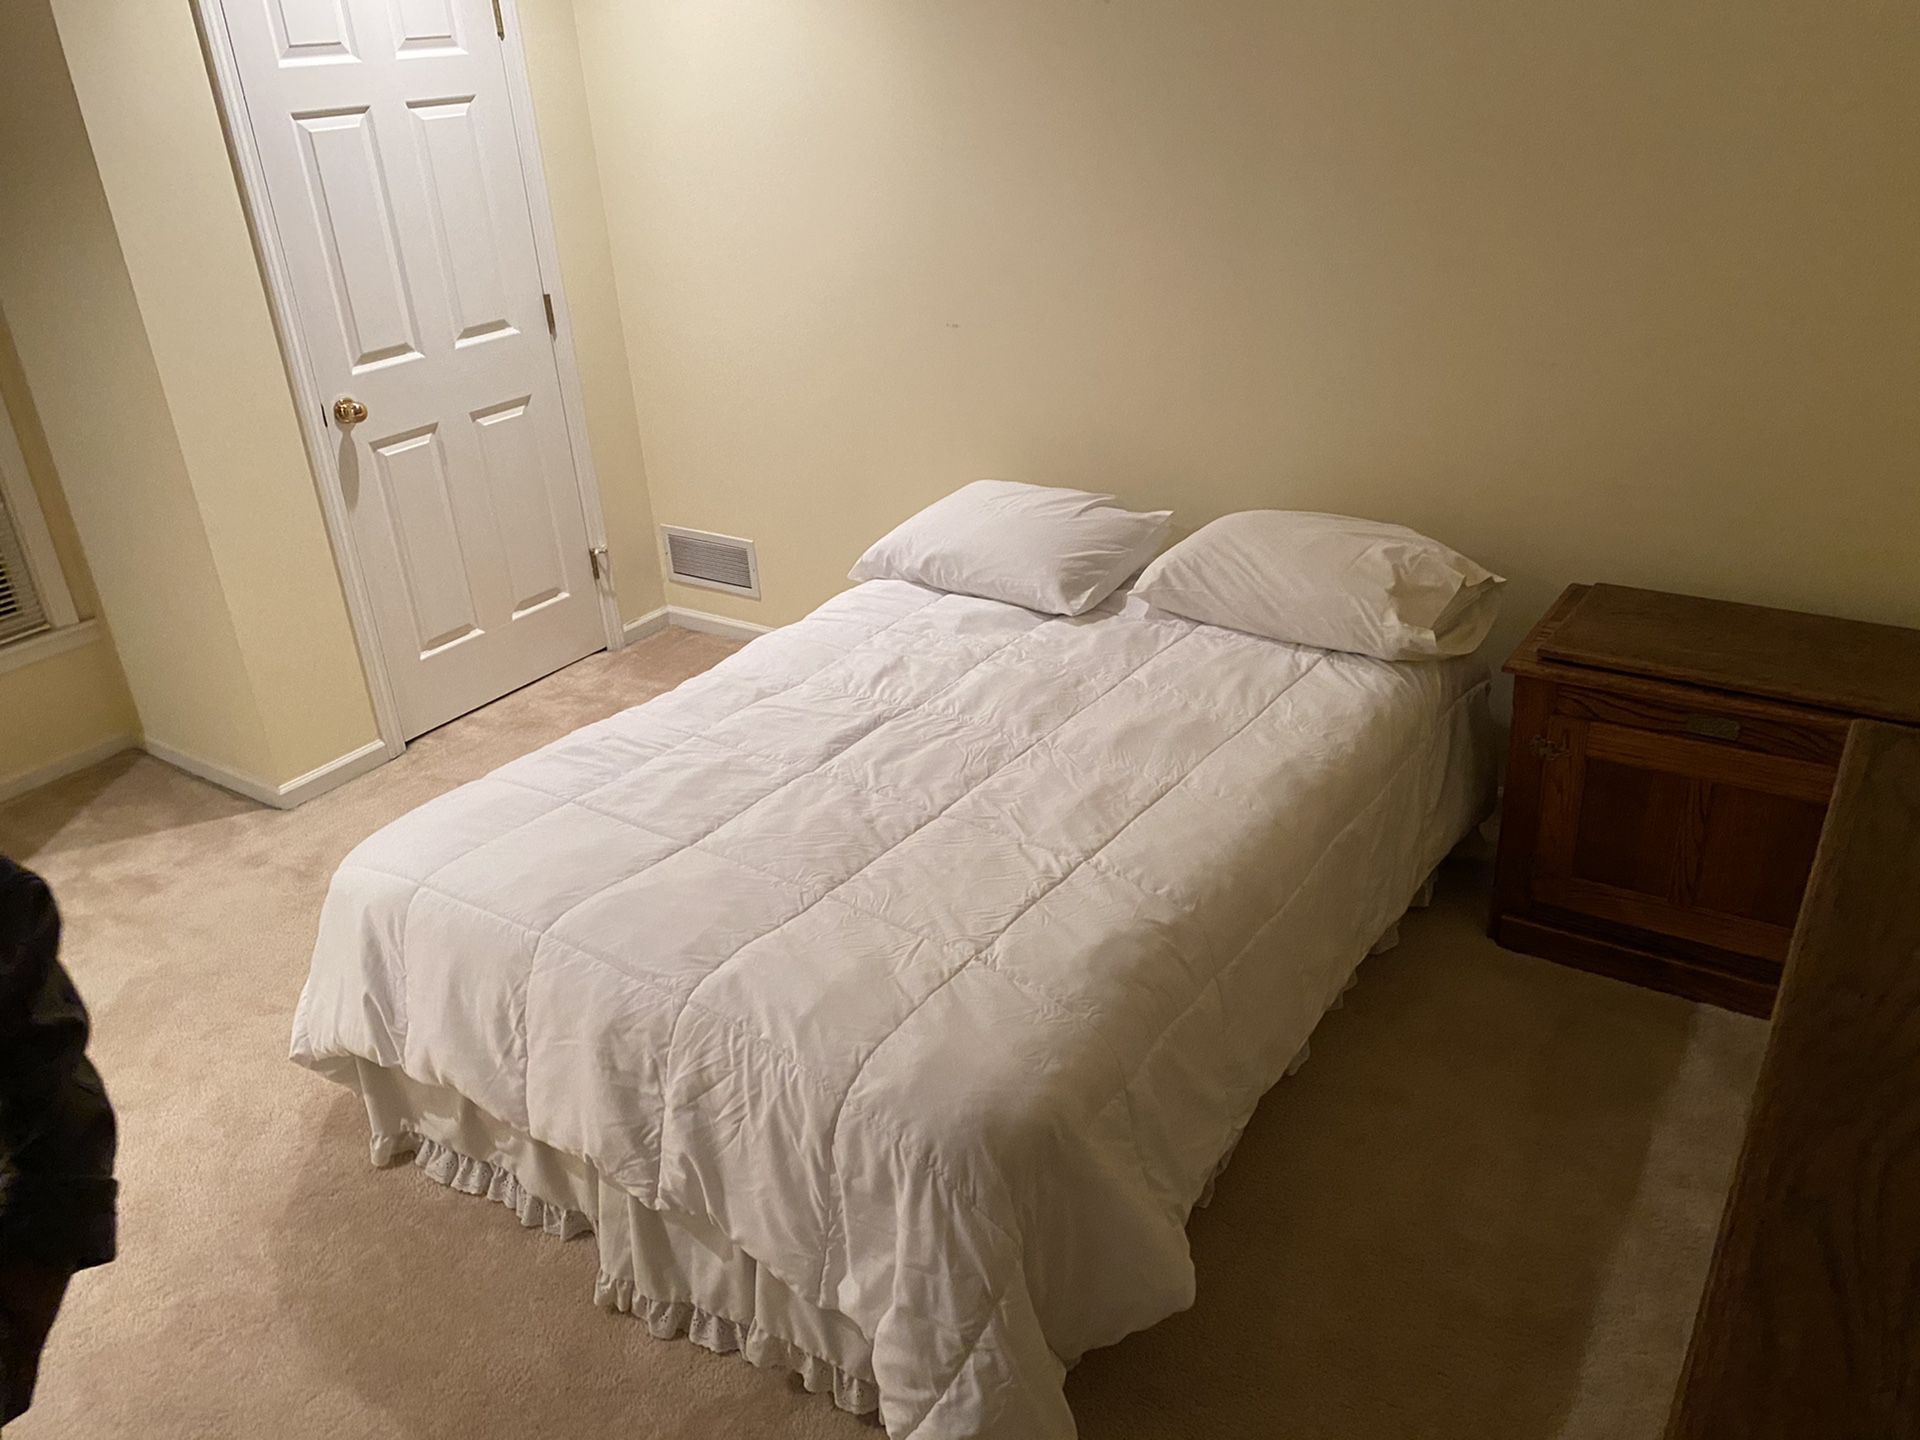 Double bed with clean barely used mattress and frame